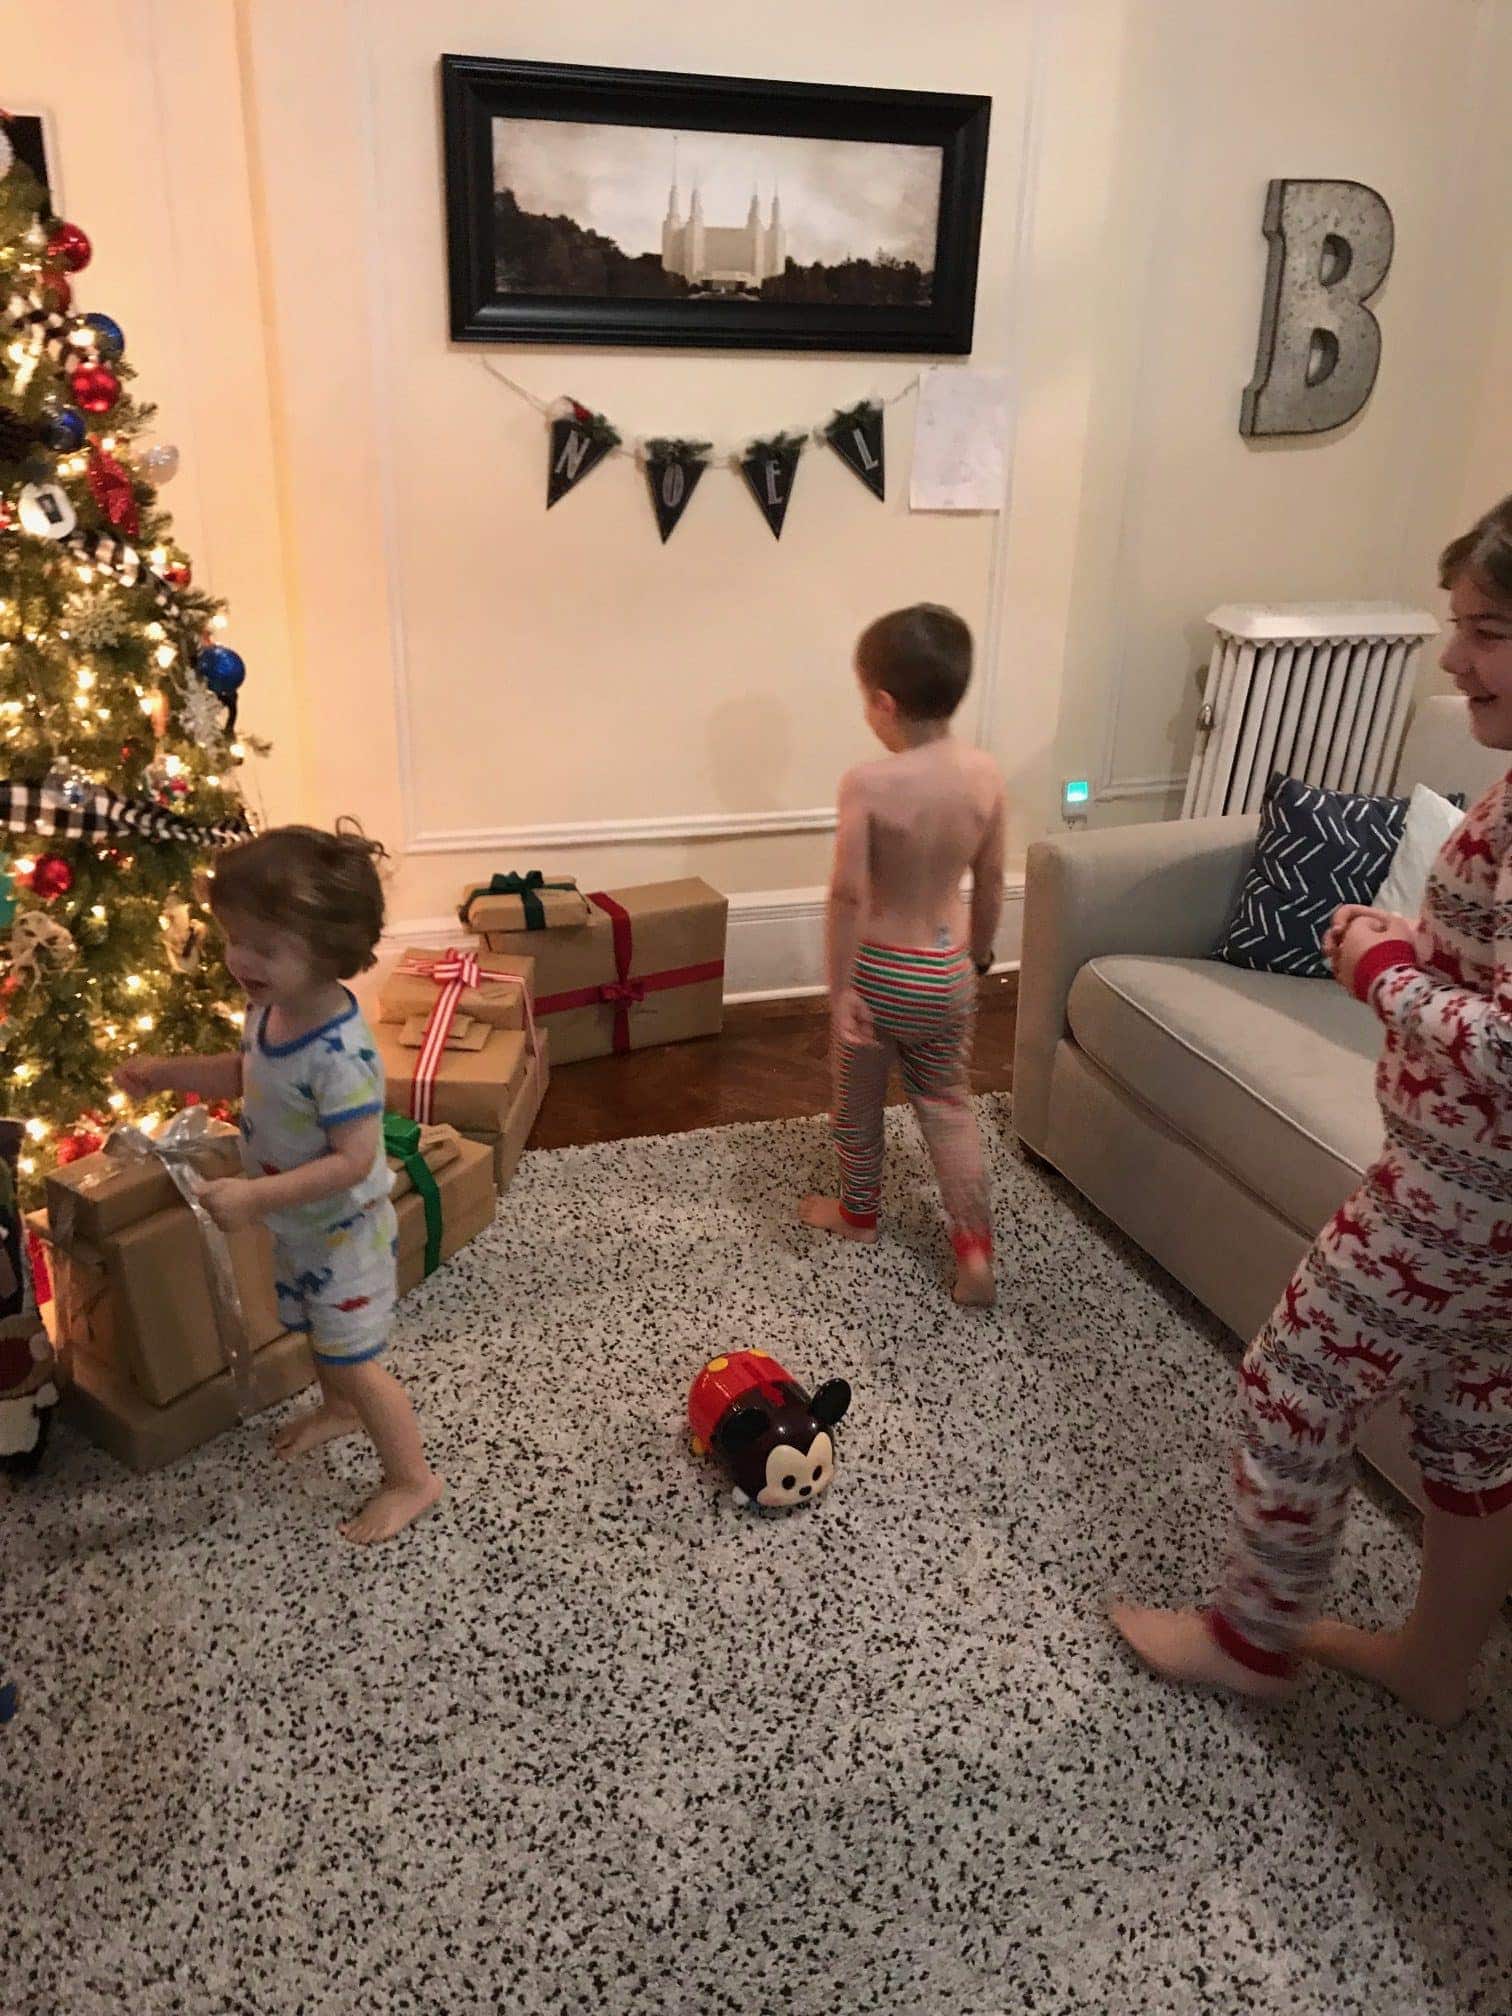 The kids walking towards the Christmas tree with presents